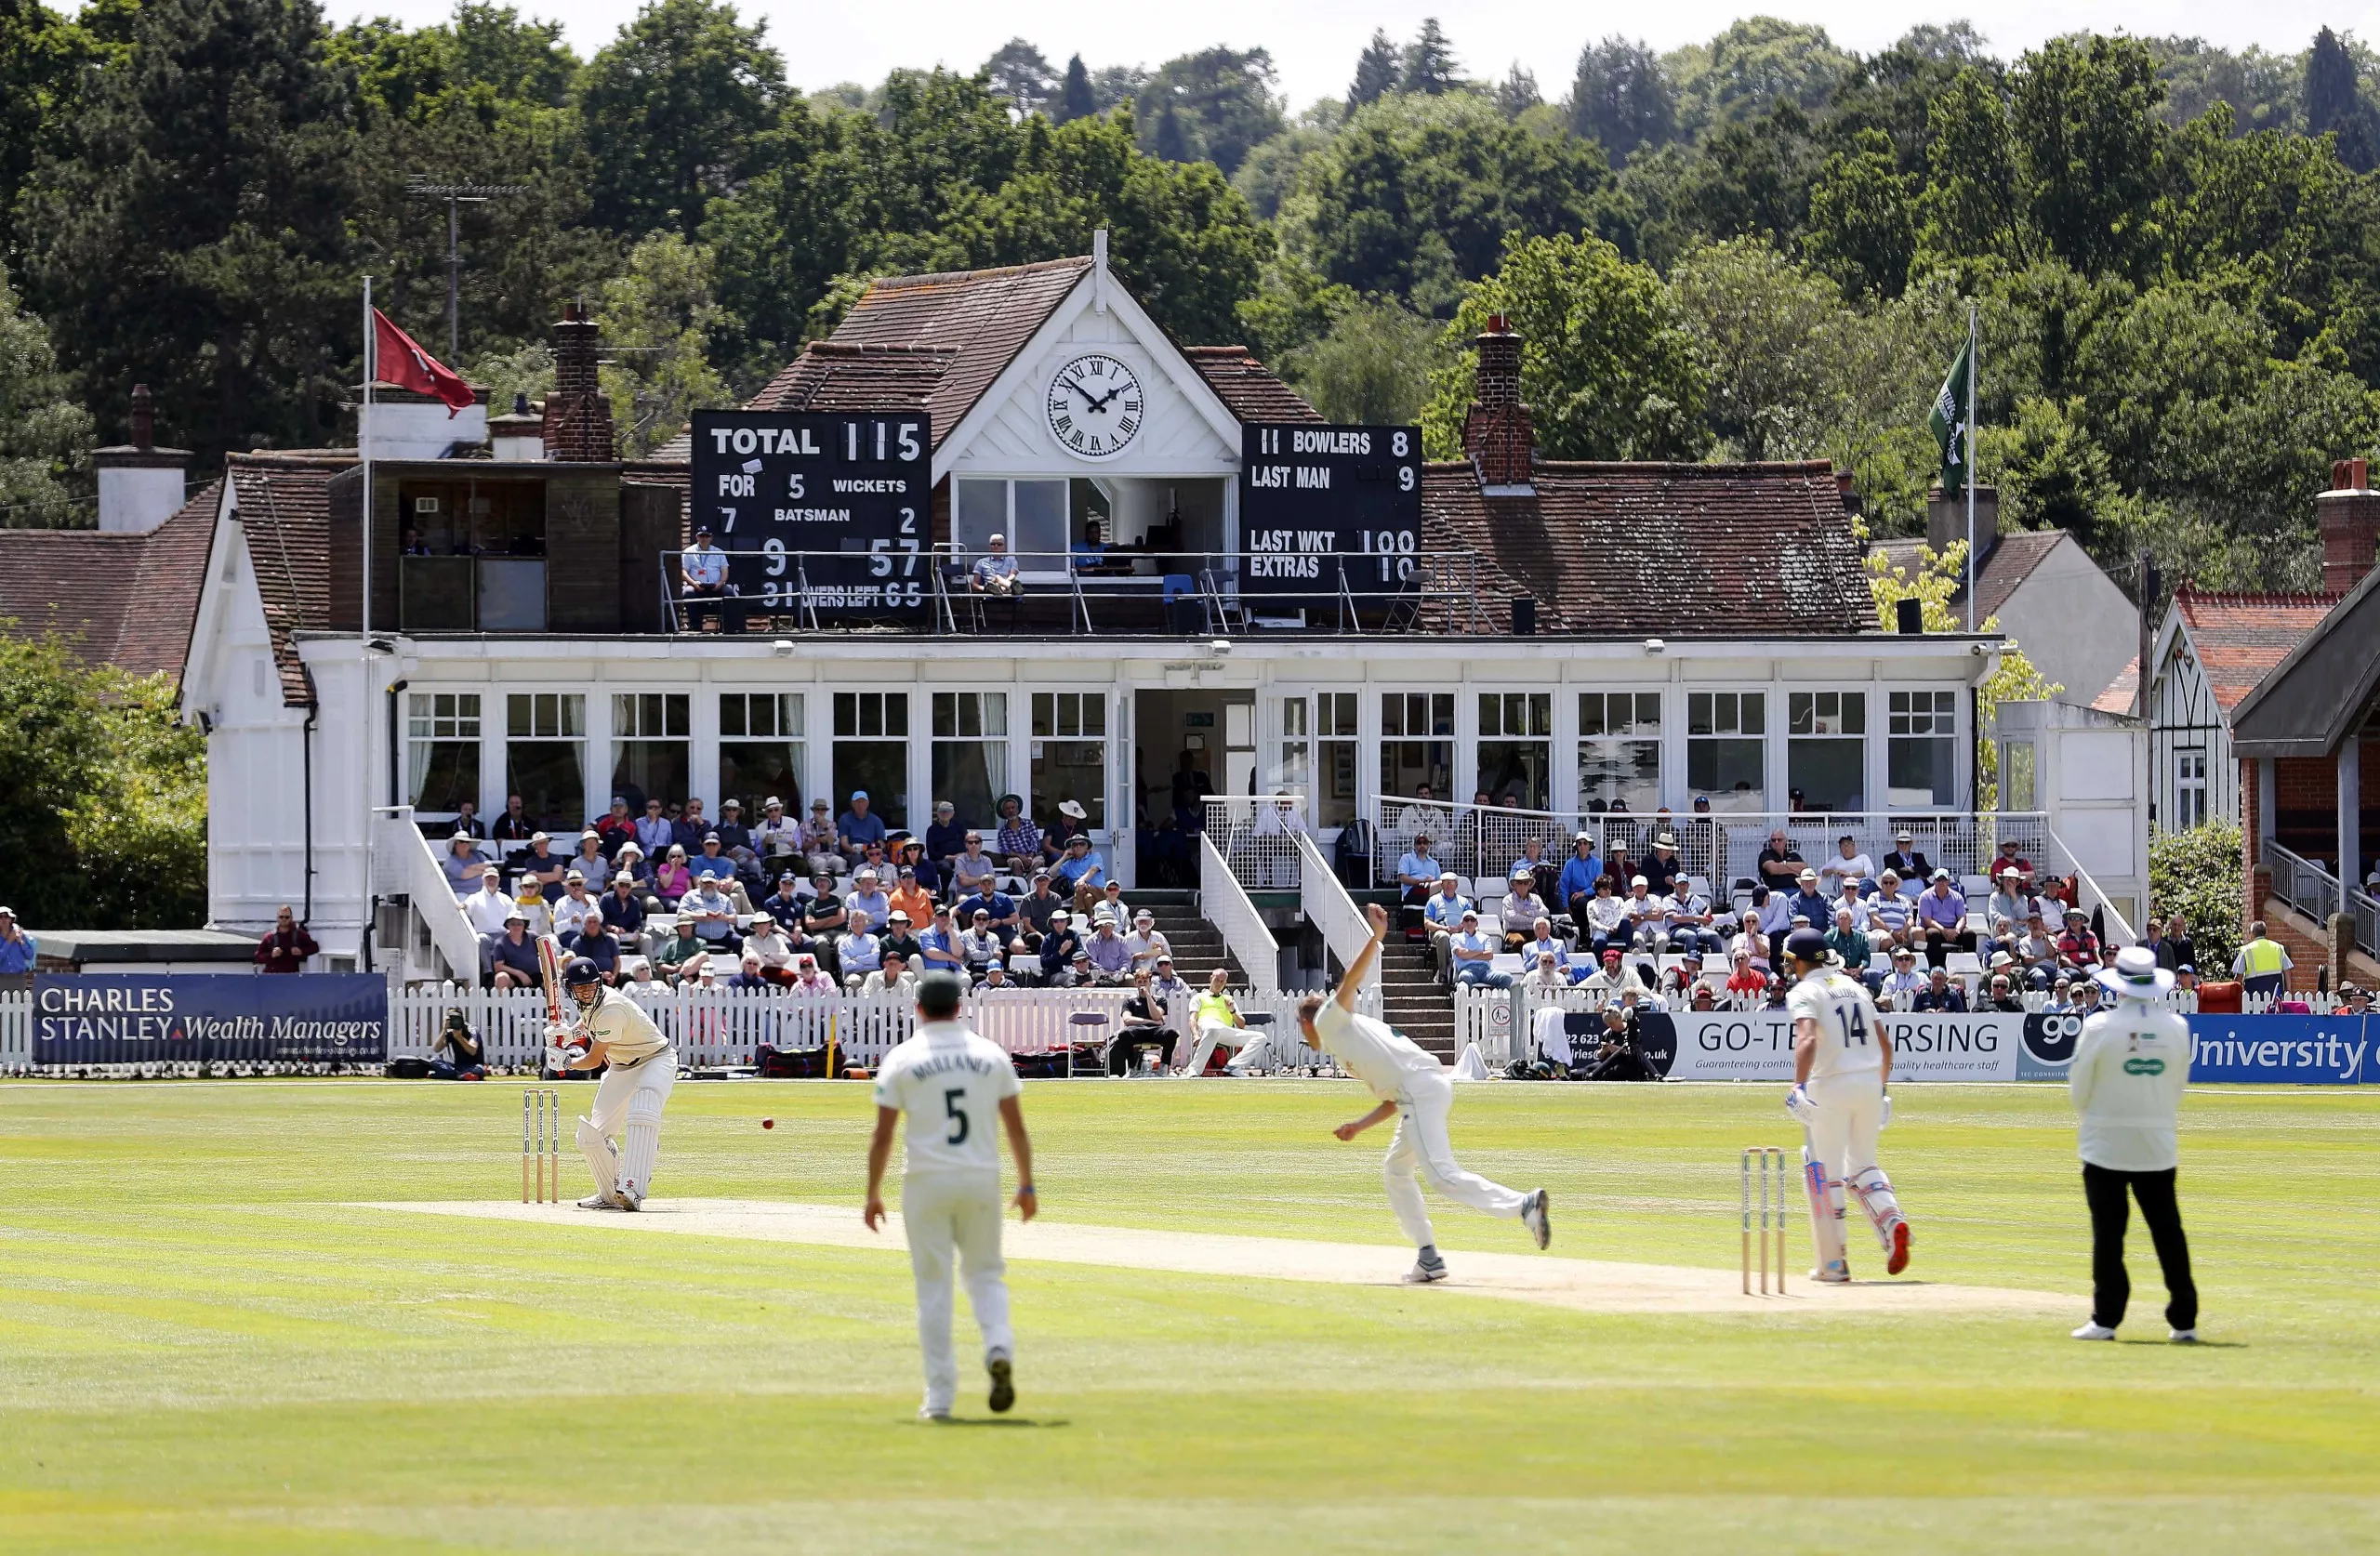 Essex County Ground in United Kingdom, Europe | Cricket - Rated 3.6